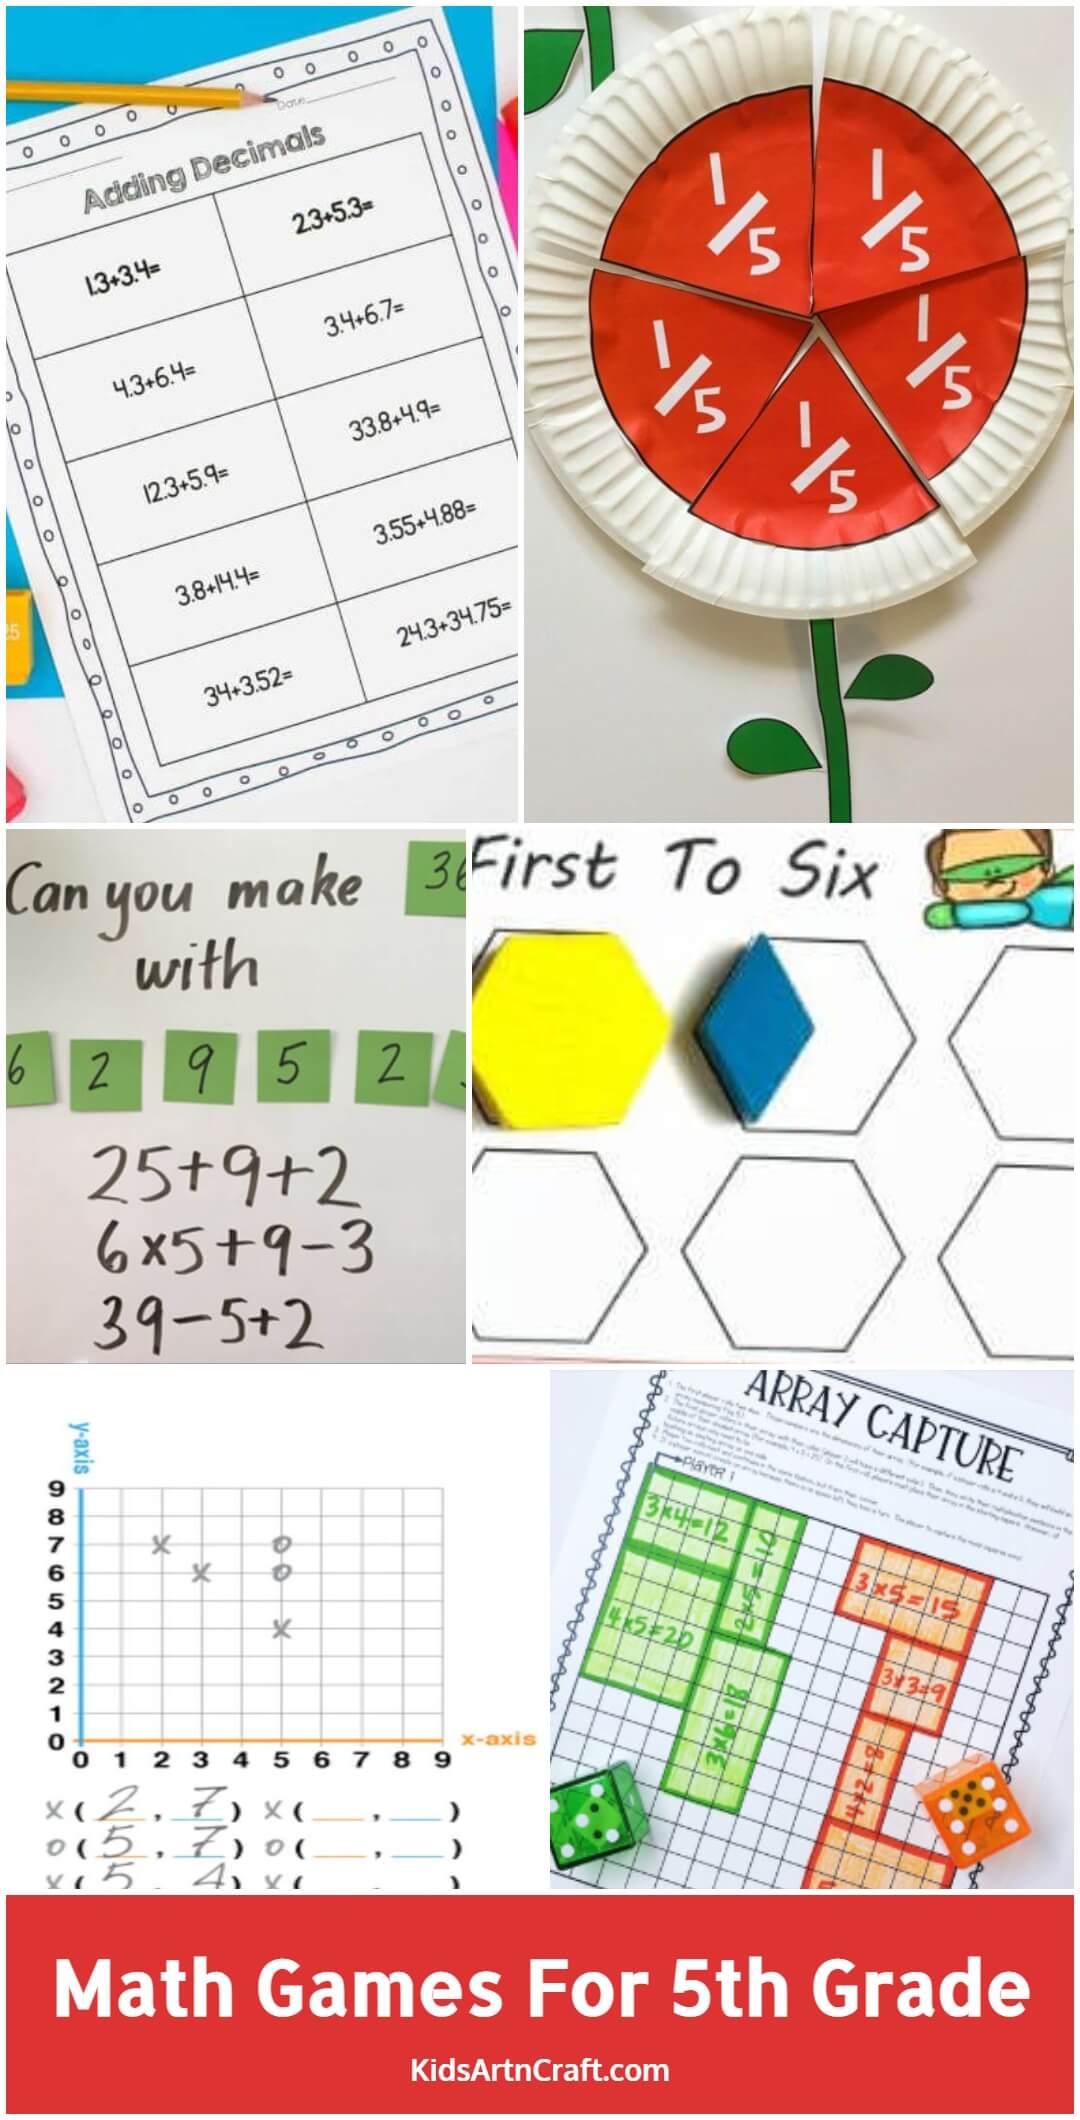  Math Games For 5th Grade